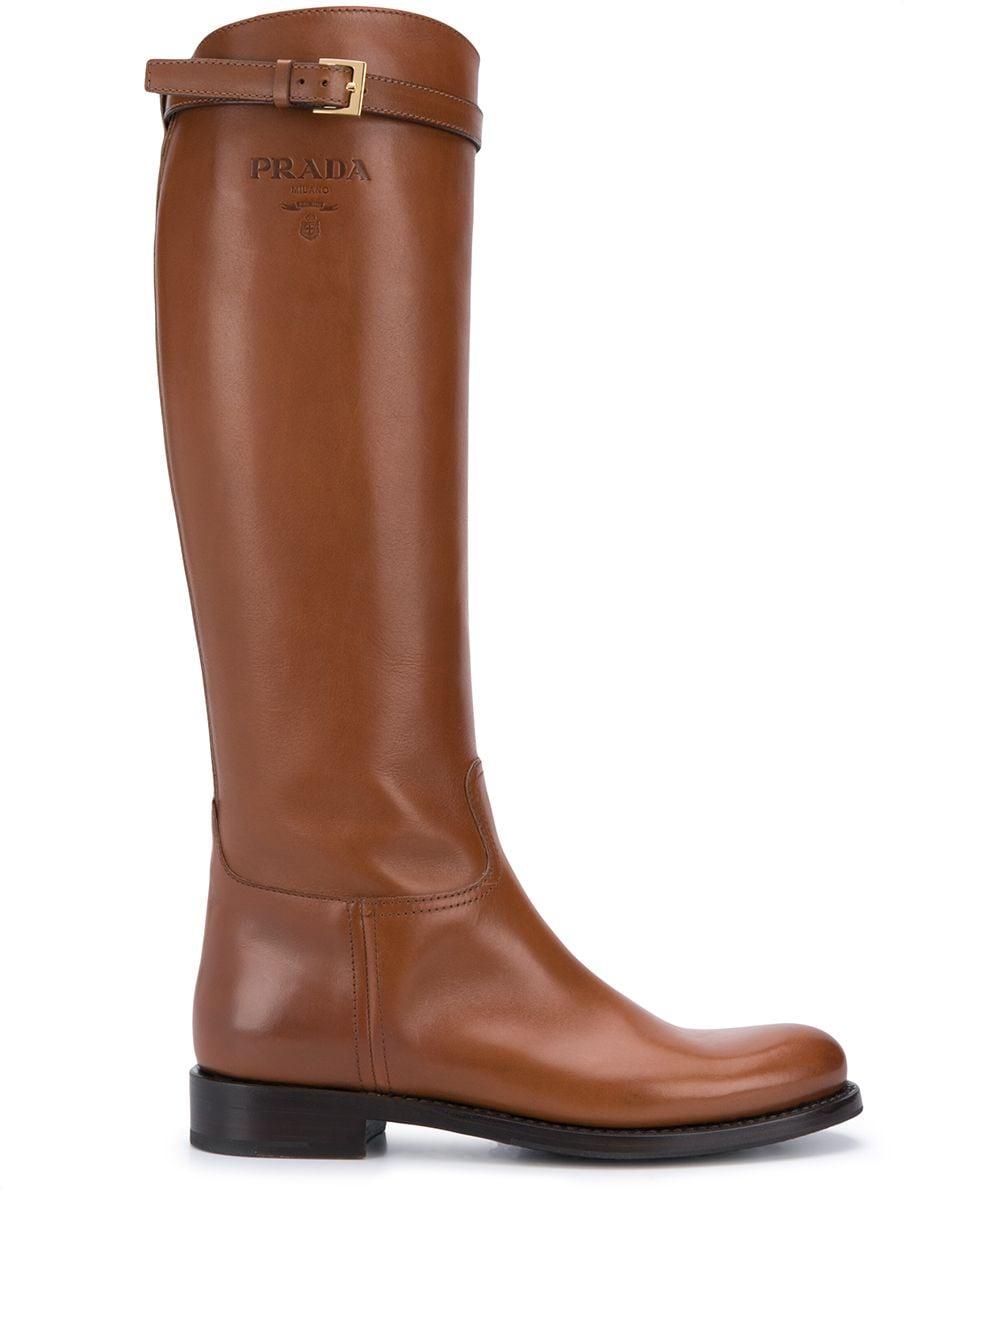 Rich Brown: Prada Brown Leather Boots